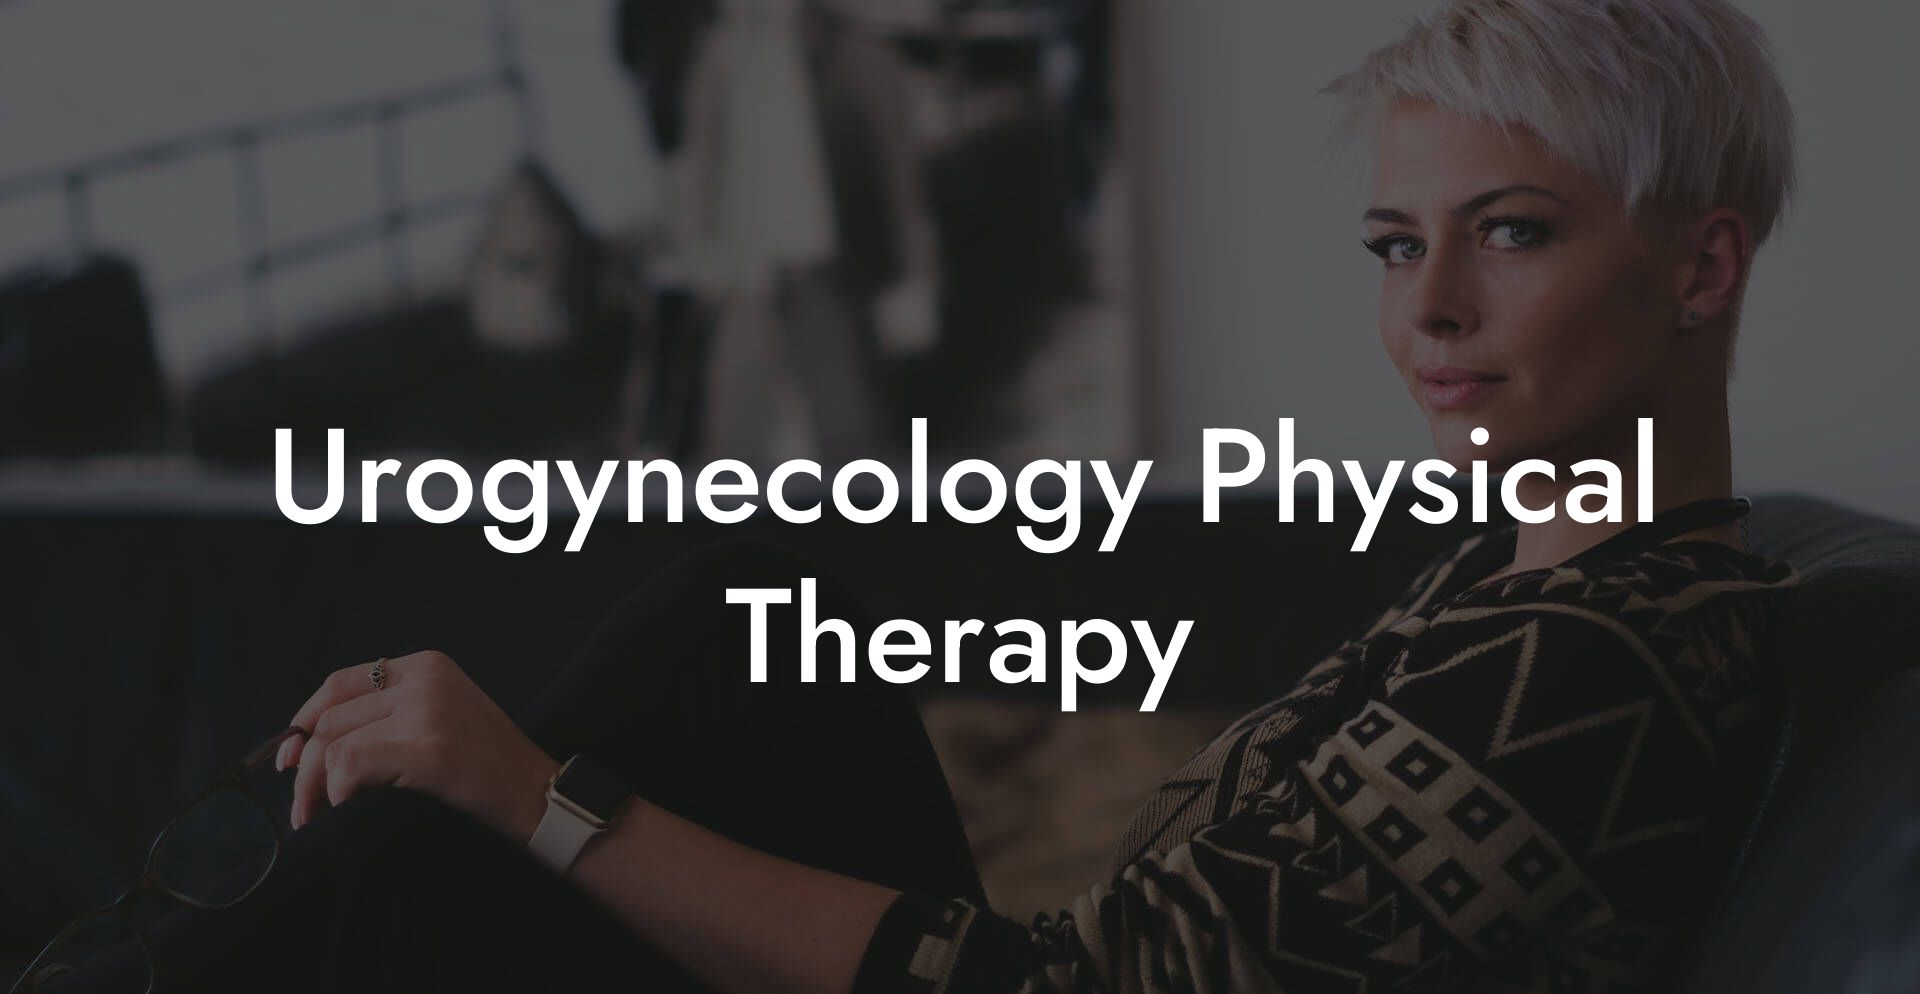 Urogynecology Physical Therapy